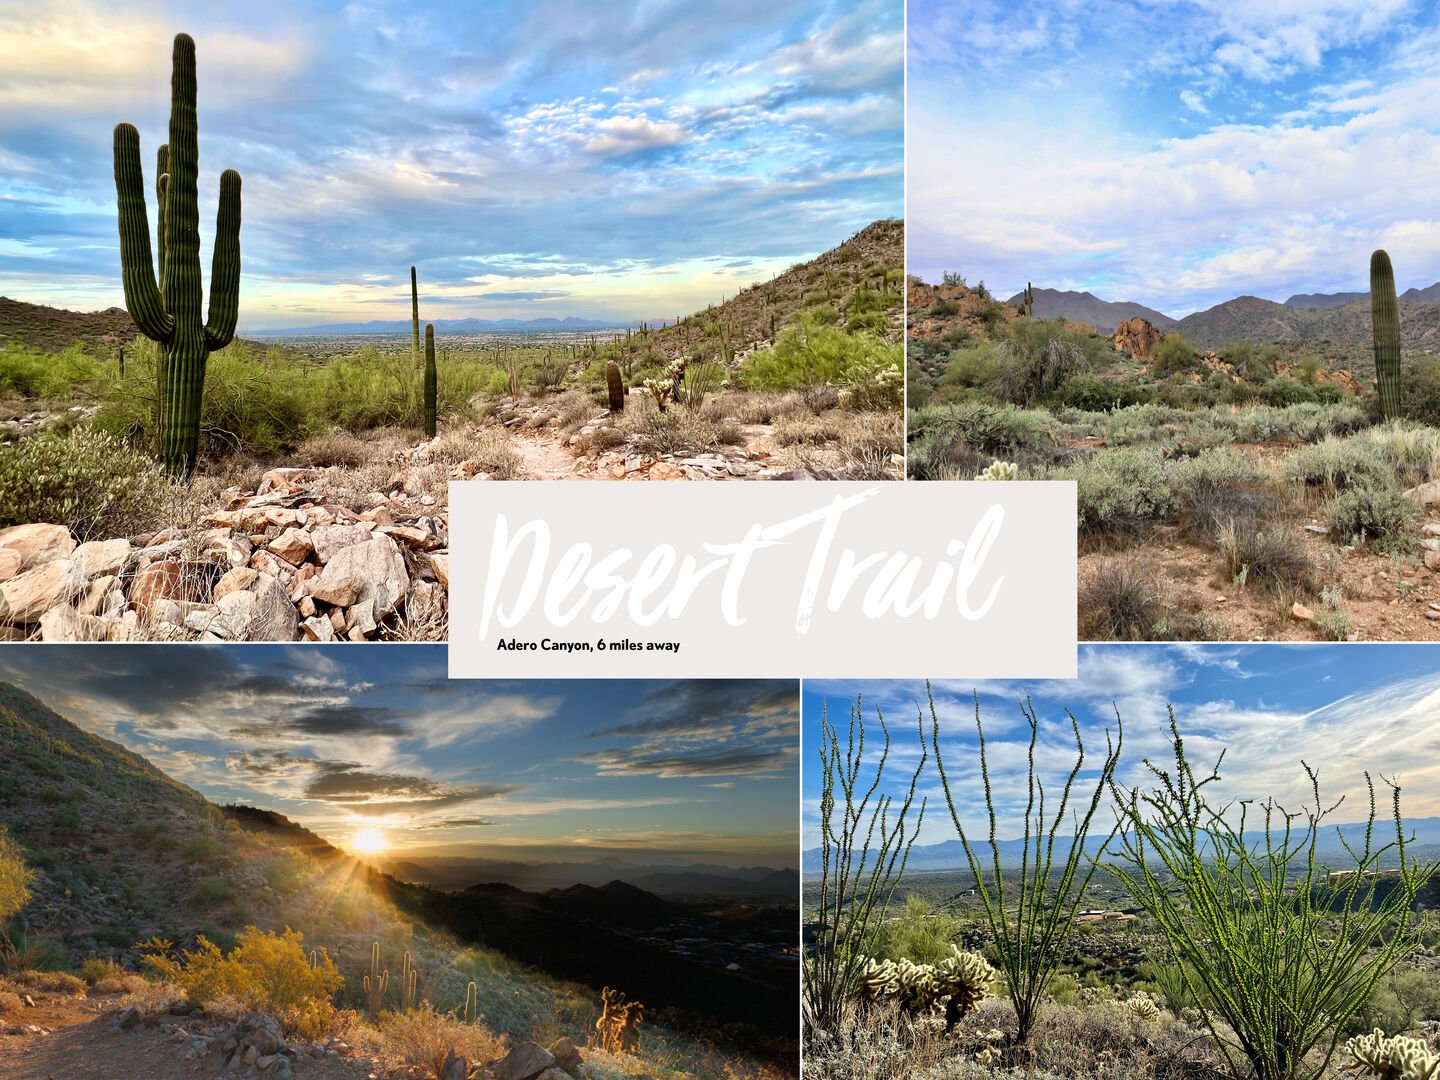 12 mins to Adero Canyons. Great Hiking Trails to experience AZ wildlife and great weather!